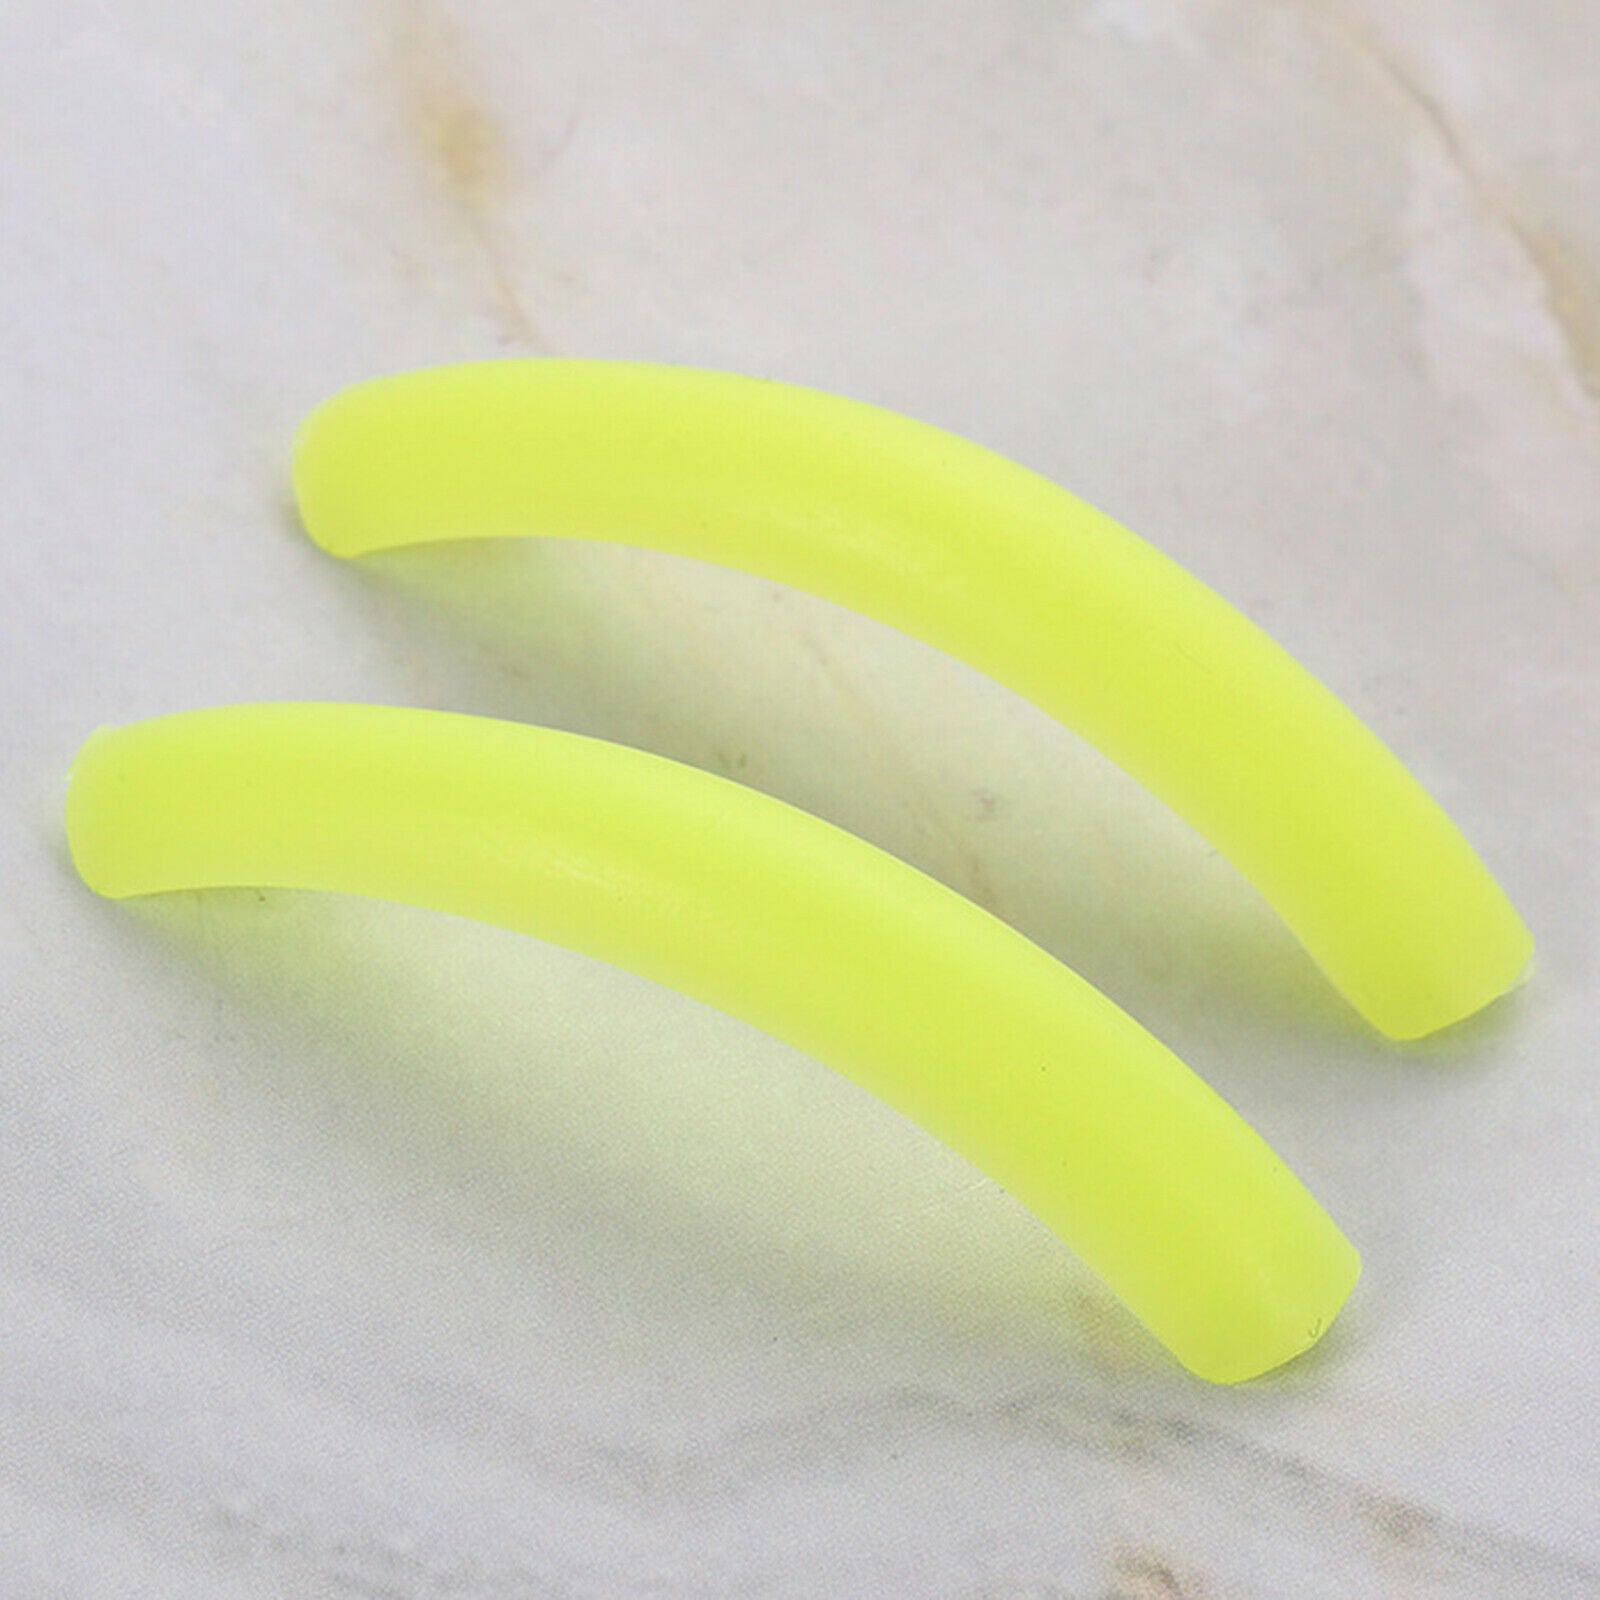 Lash Perm Pads Reusable Silicone Curler Shields for Beauty Tool Lash Listing